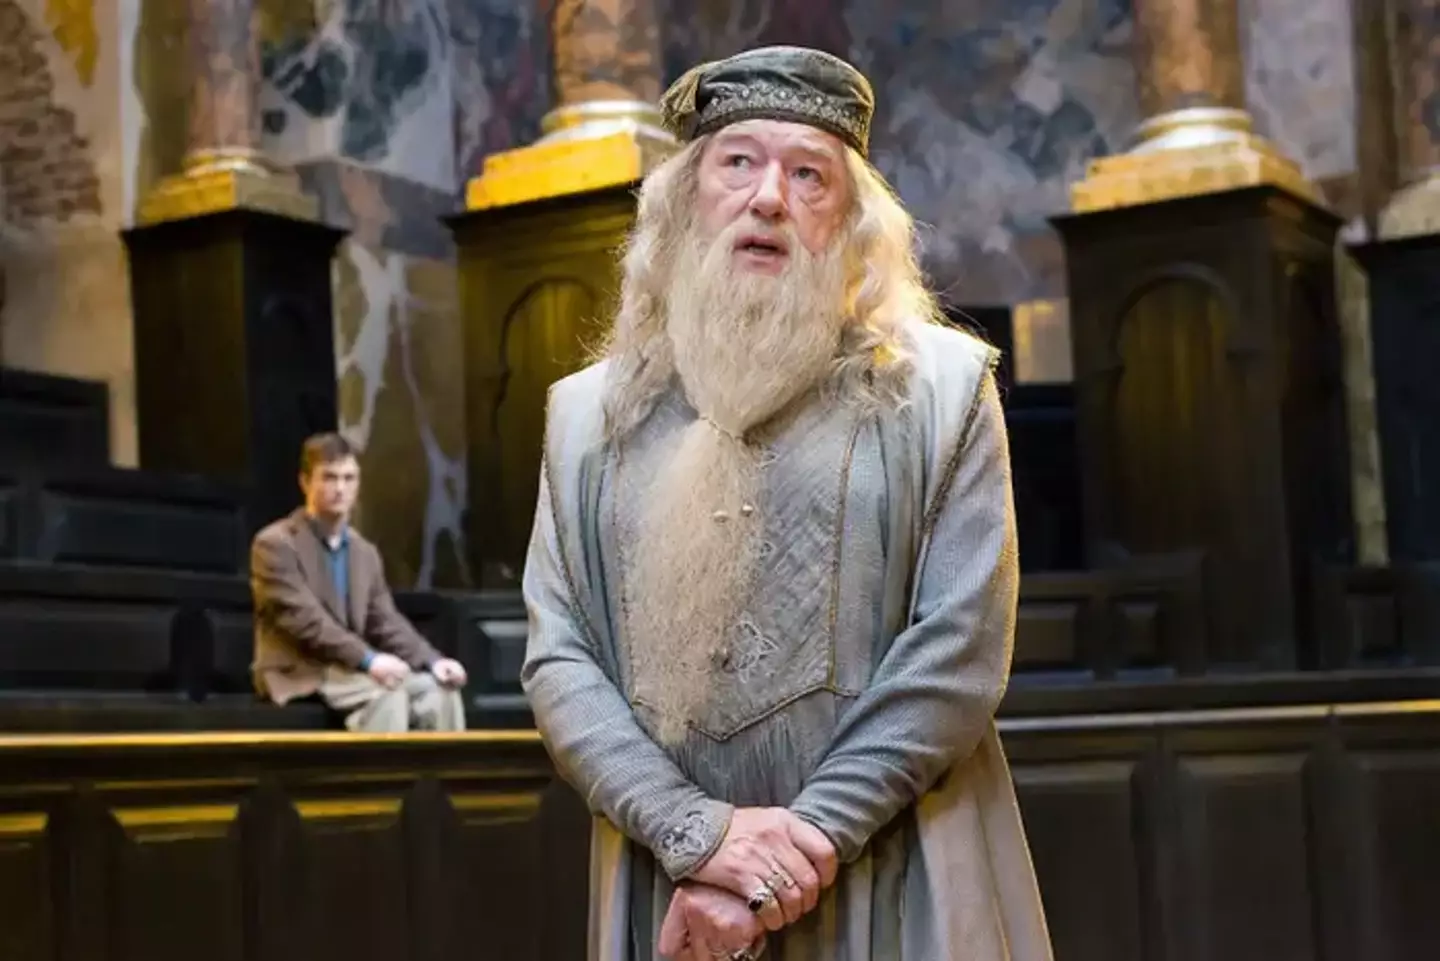 Gambon will remember for his iconic portrayal of Albus Dumbledore.